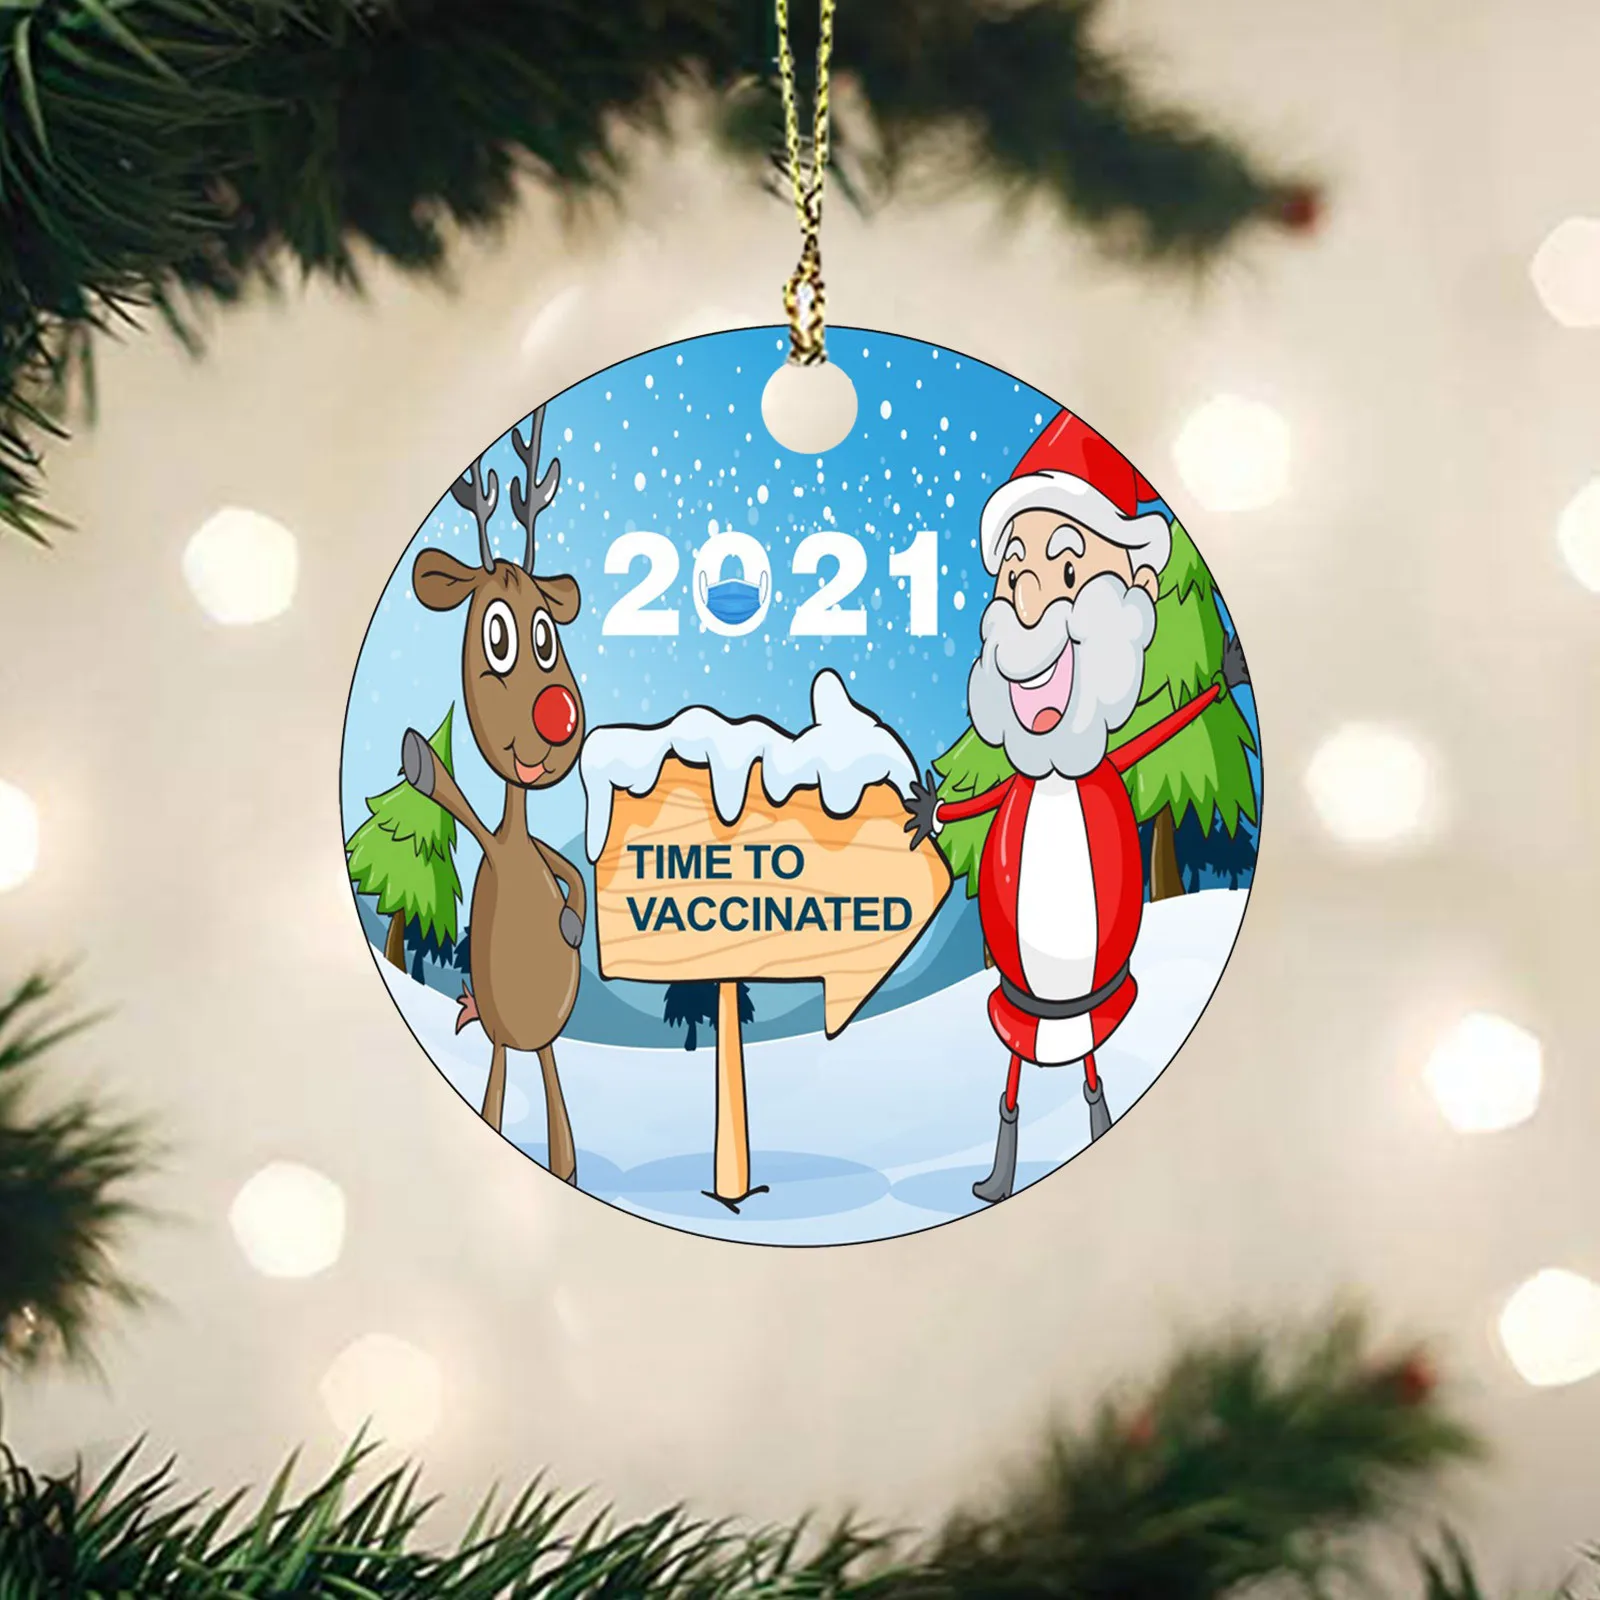 StrCloud 2021 Merry Christmas Ornaments Gift Ceramic Pendant 14 Christmas Tree Xmas Tree Ornament Hanging Accessories Round Ceramic Two-Side Printed Holiday Home Décor